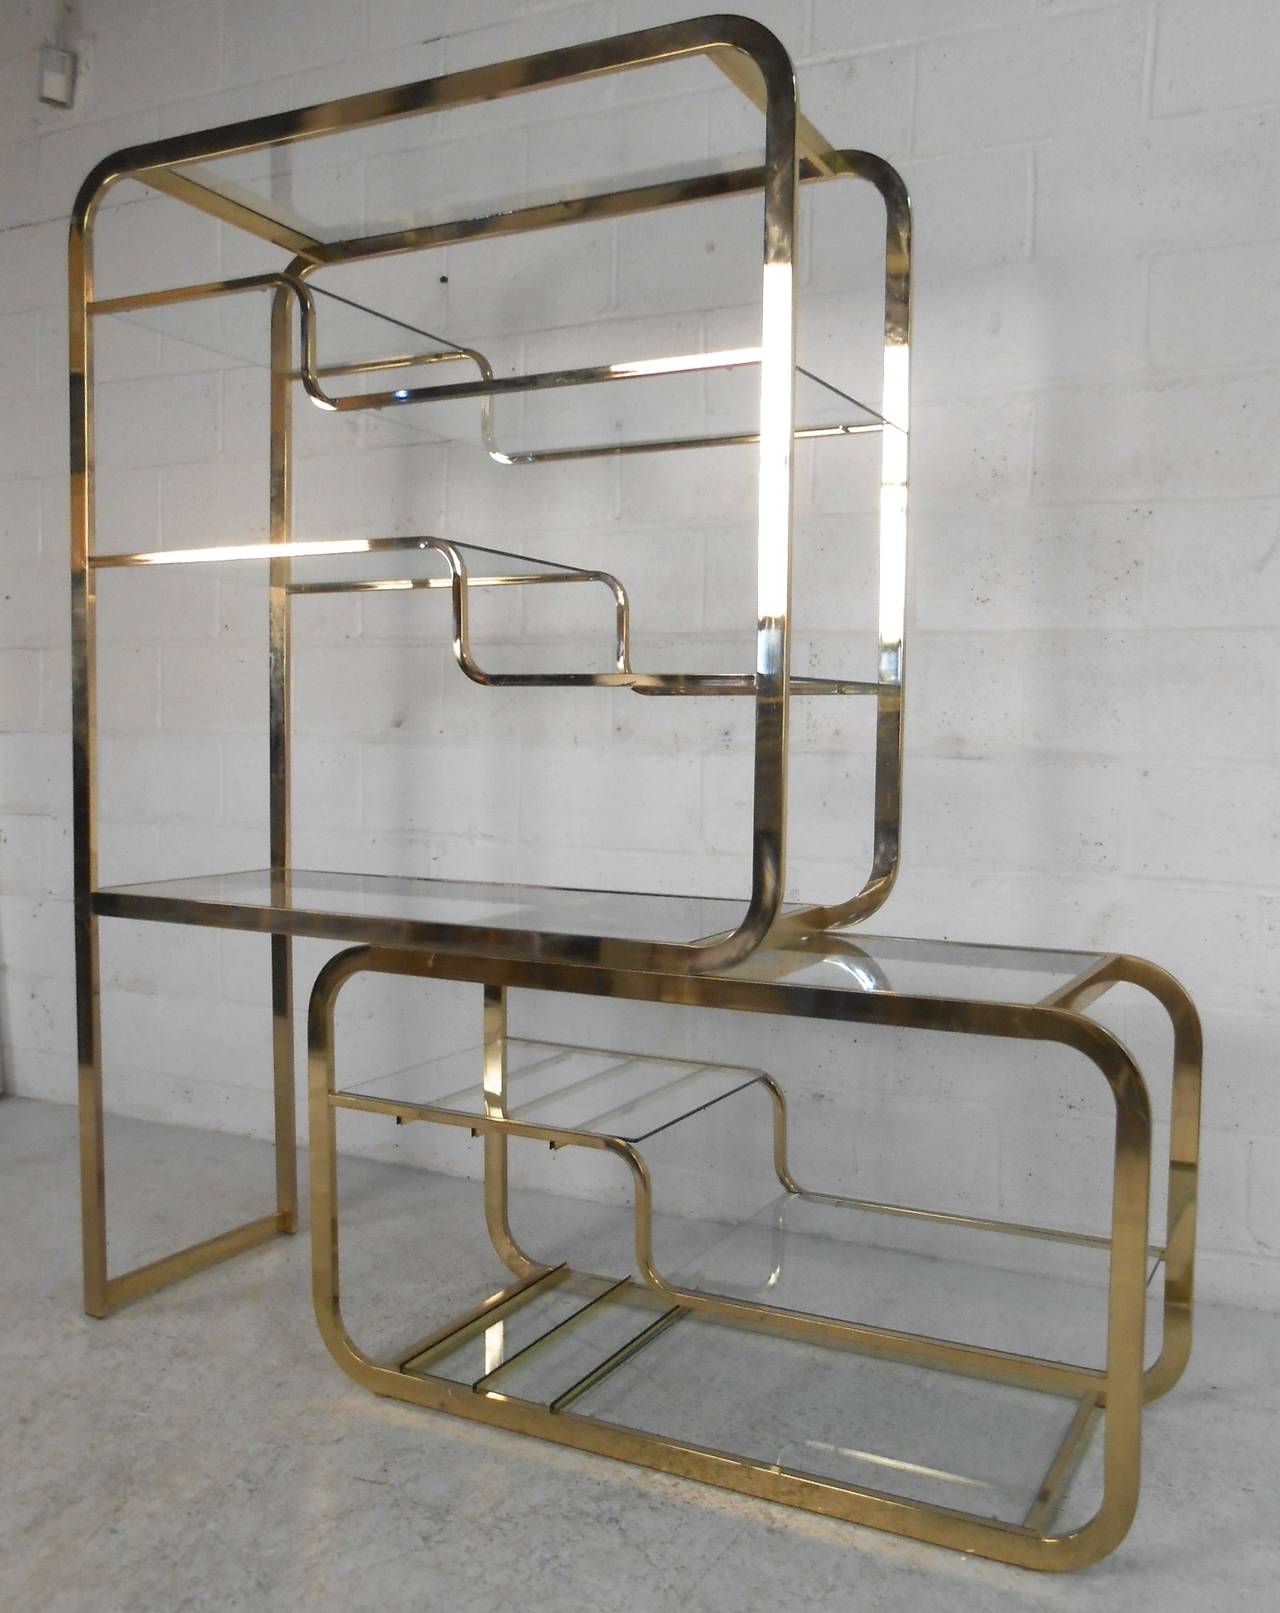 This wonderfully designed etagere features a perfect mixture of style and display space, suited to any home or business. Unique sliding two piece construction allows some customization on width, and makes a striking visual statement. Please confirm